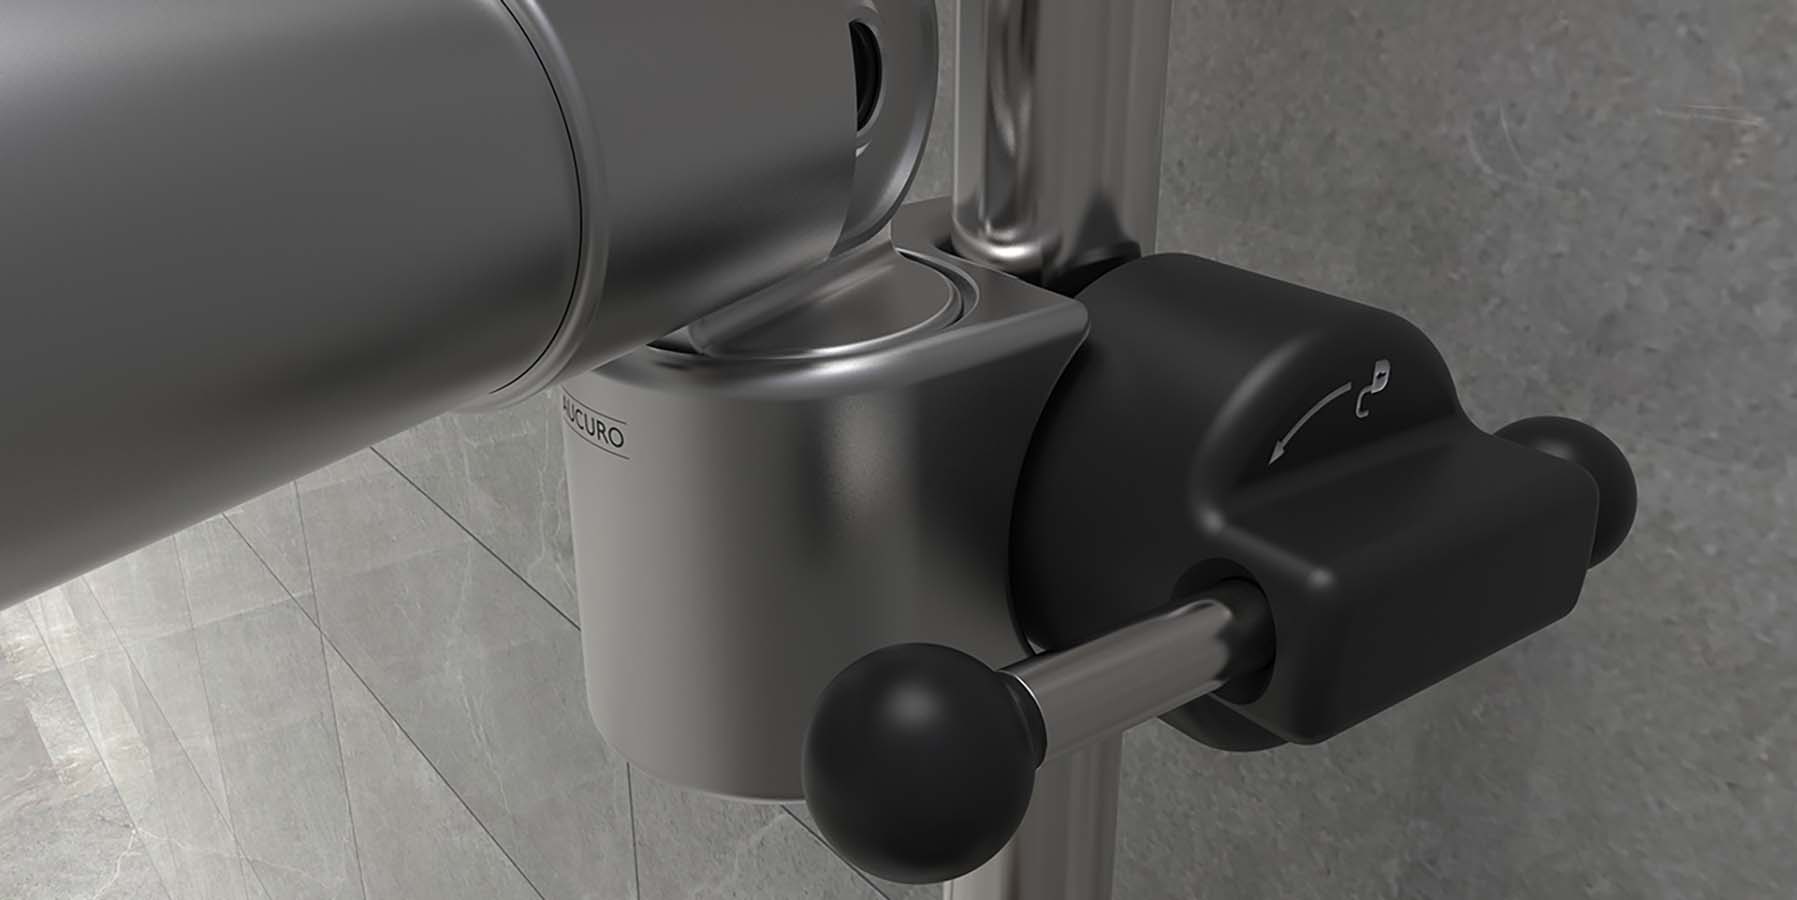 closeup of the clamping system of the telescopic shower holder attached to a grab rail with a lever extending from the clamp